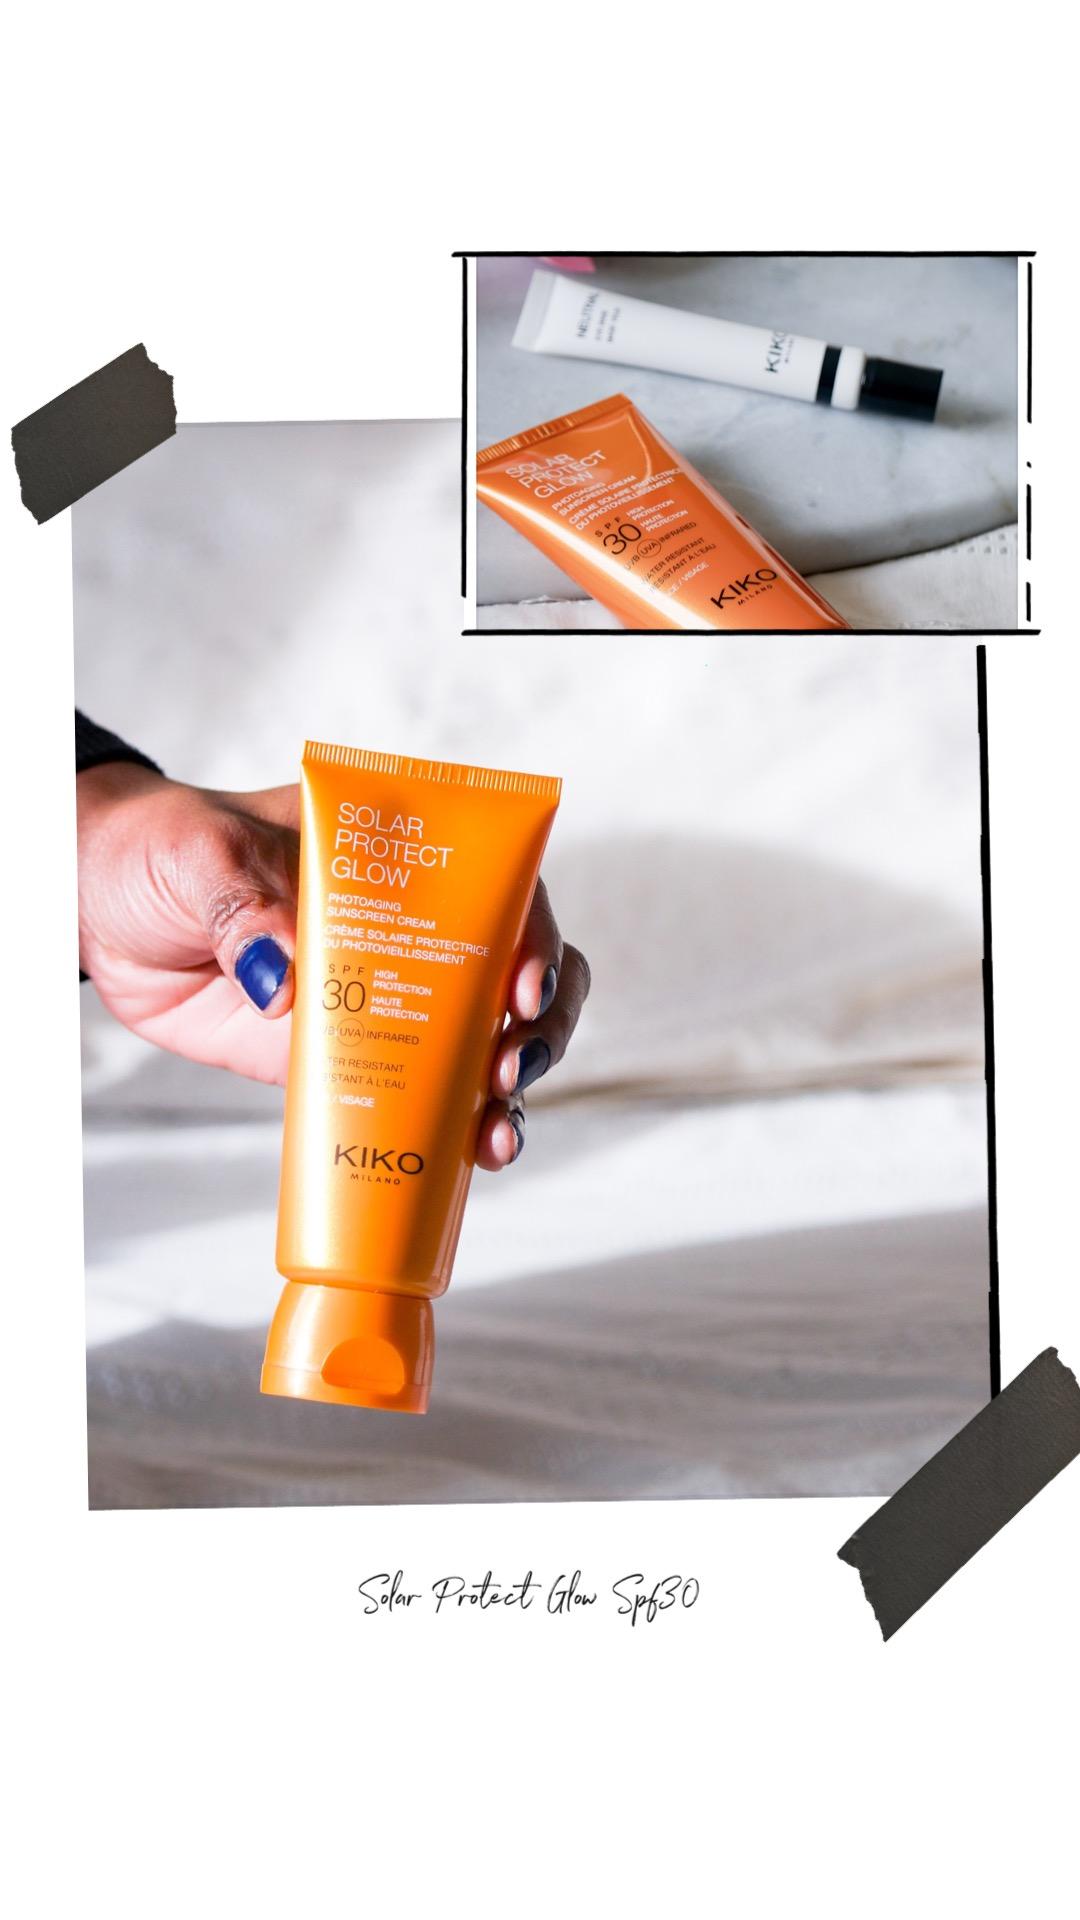 What I bought from KIKO Milano Online| My thoughts on everything I bought - all under £10, including this SPF30 |If you're looking for cruelty free, affordable makeup and beauty, then you'll definitely be interested| www.kittyandb.com #KIKOTrendsetters #SPF #beautyreviews #crueltyfree #beautyblog